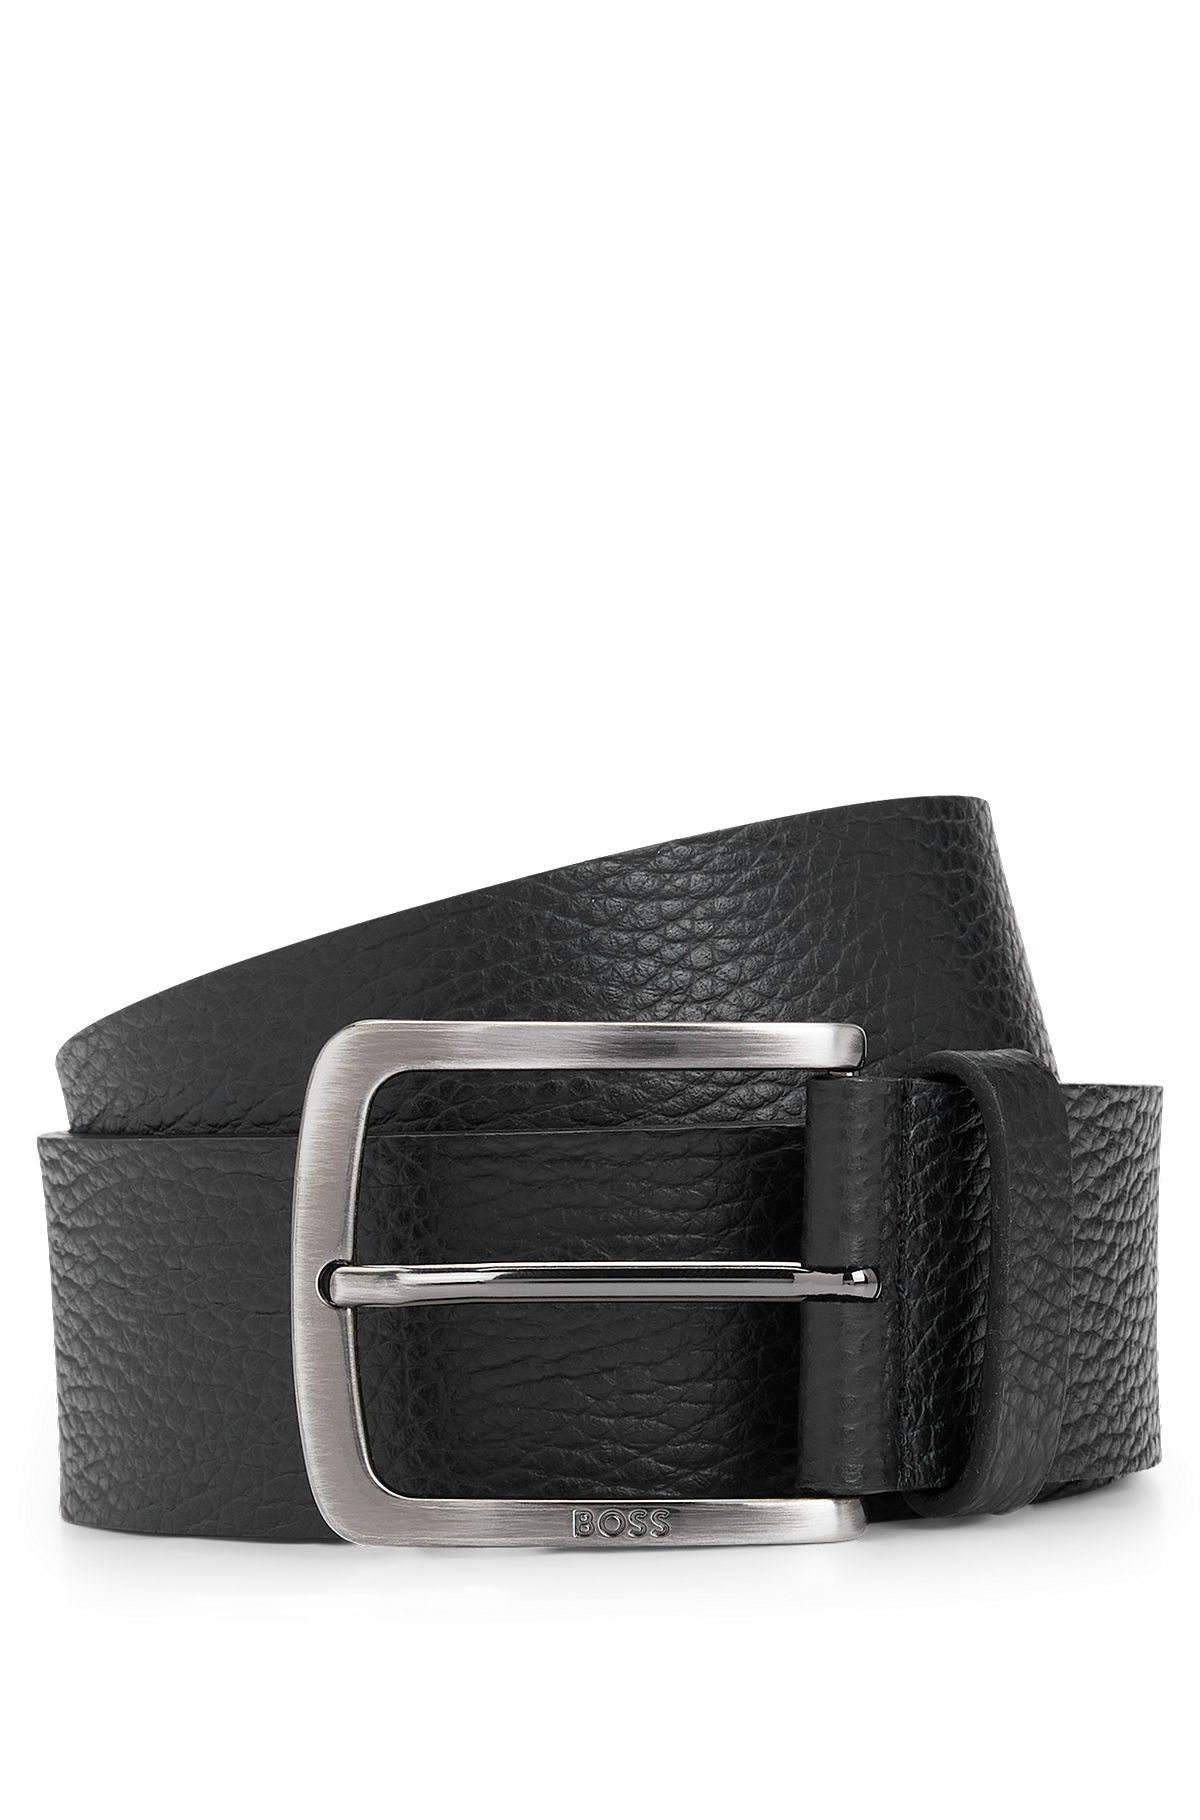 Grained Italian-leather belt with branded buckle, Black